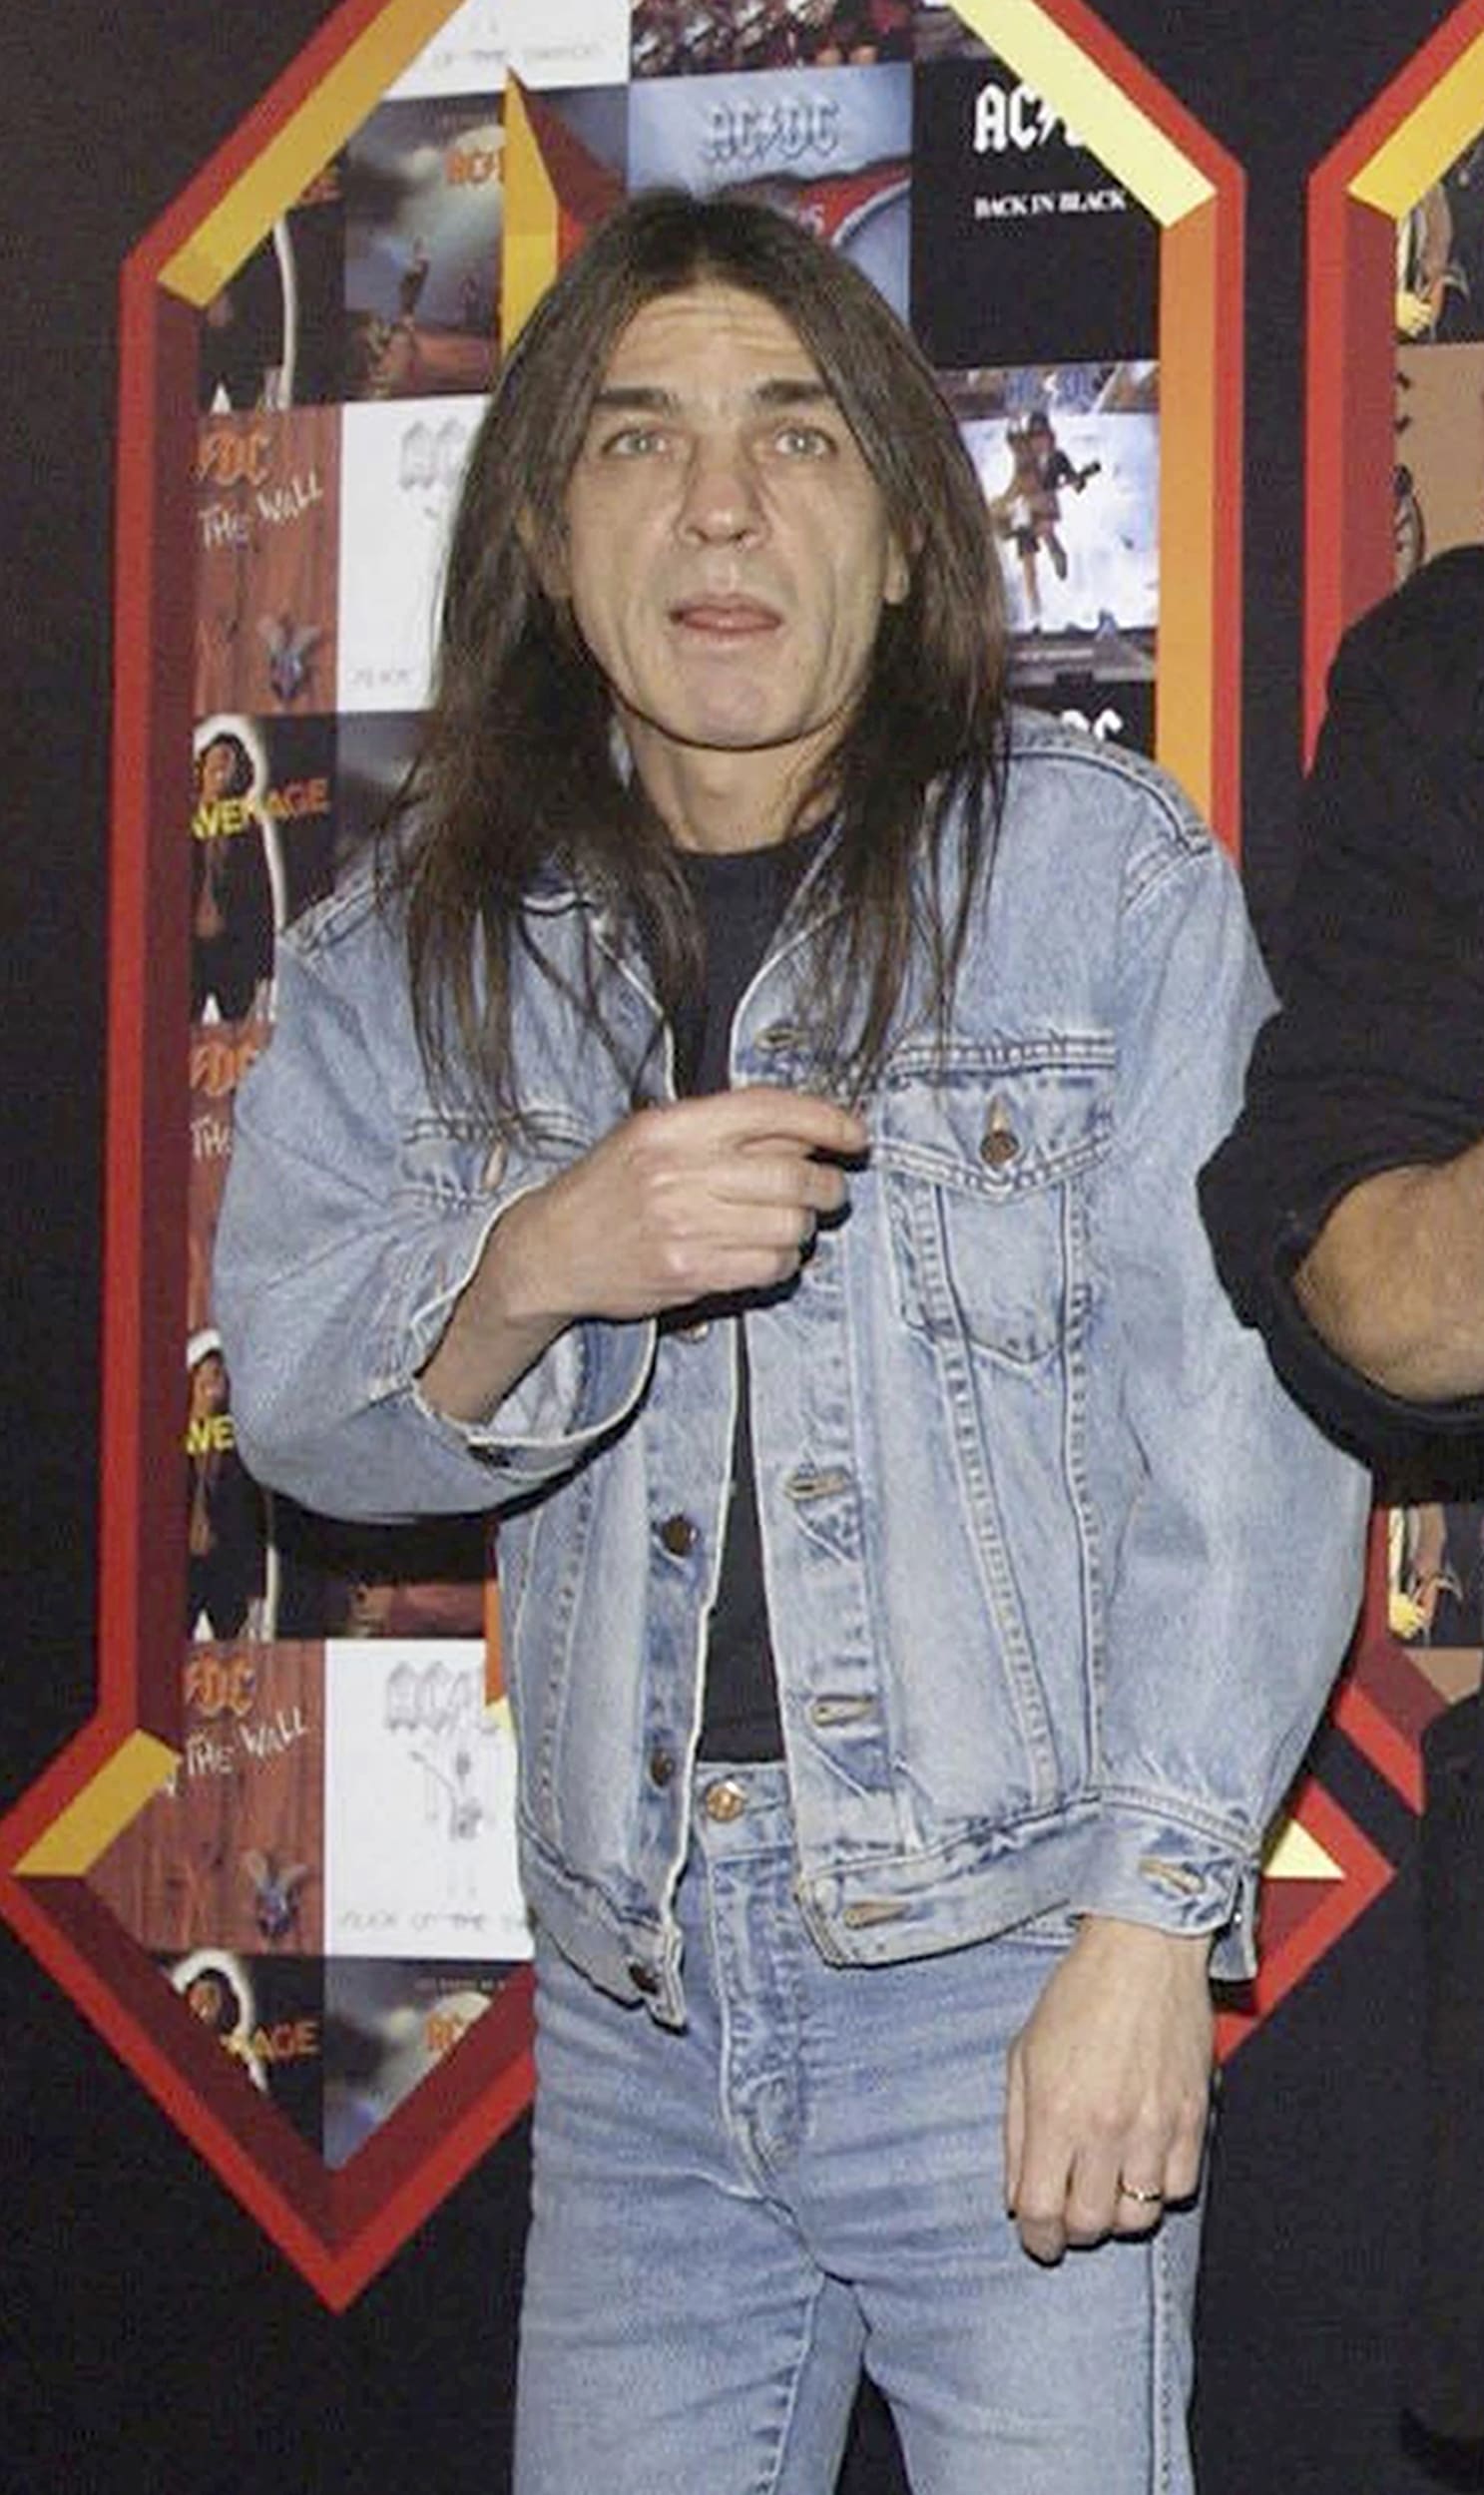 AC/DC co-founder Malcolm Young at 64